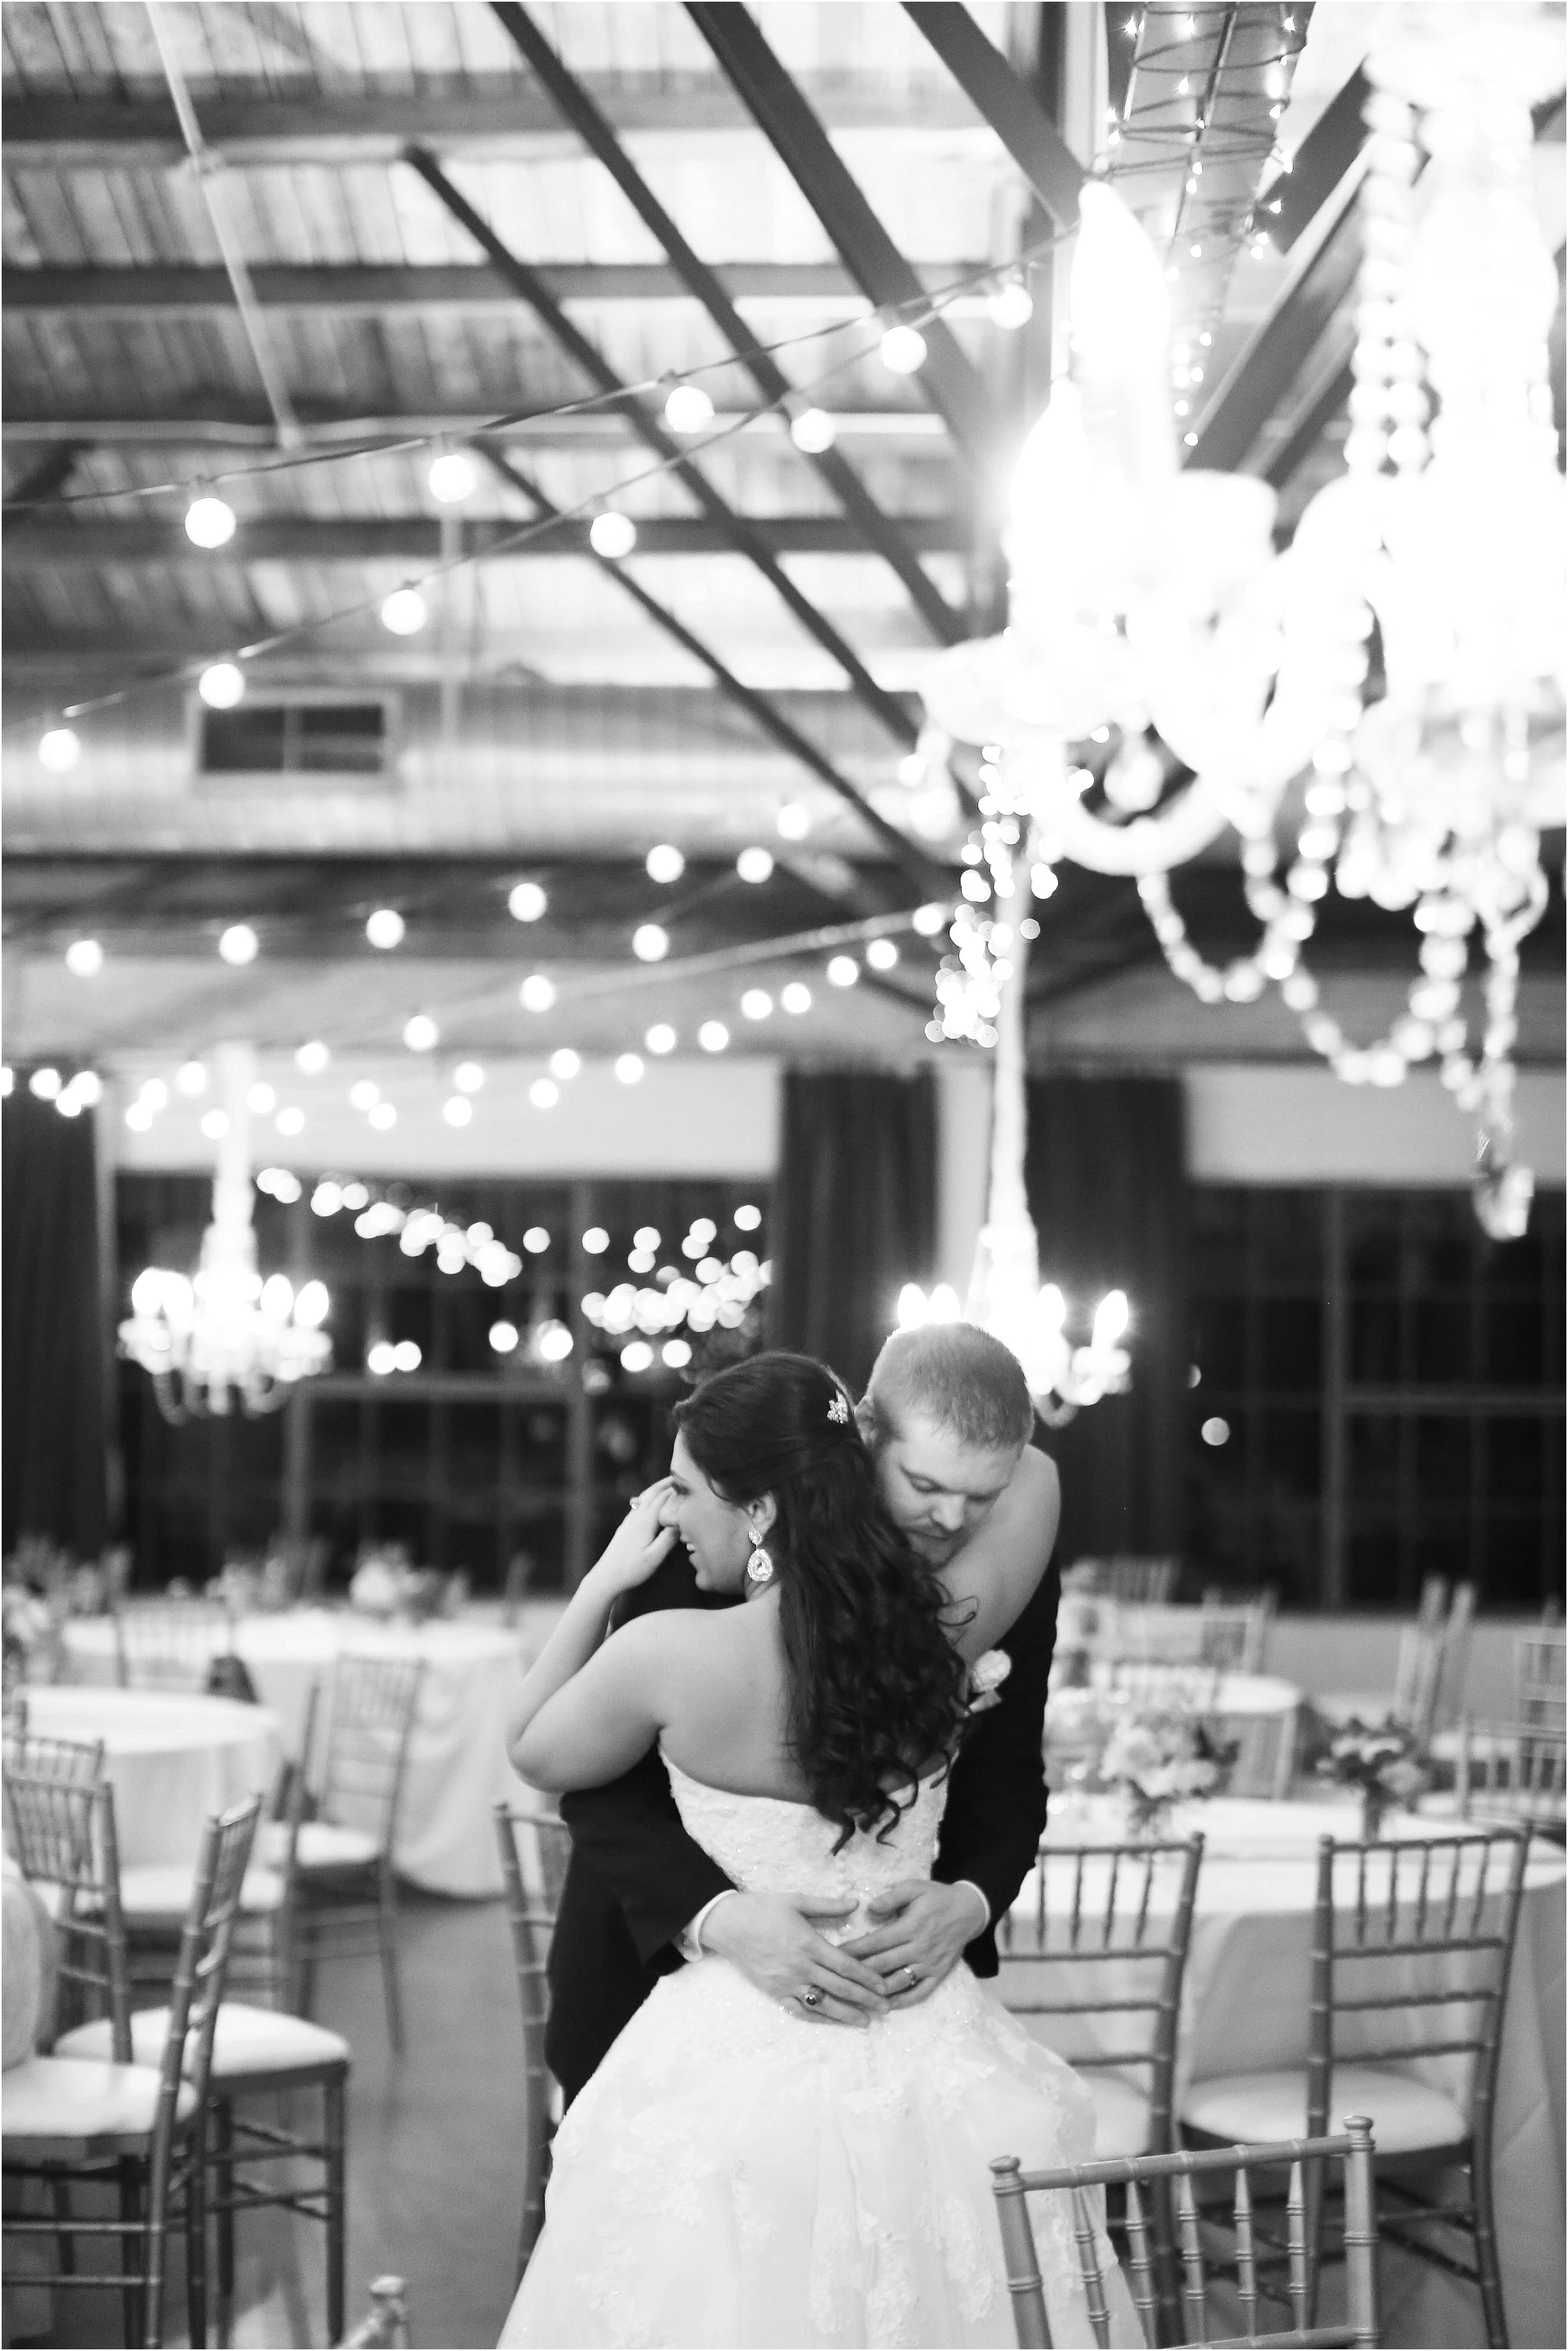 View More: http://tuckerimages.pass.us/moserwedding